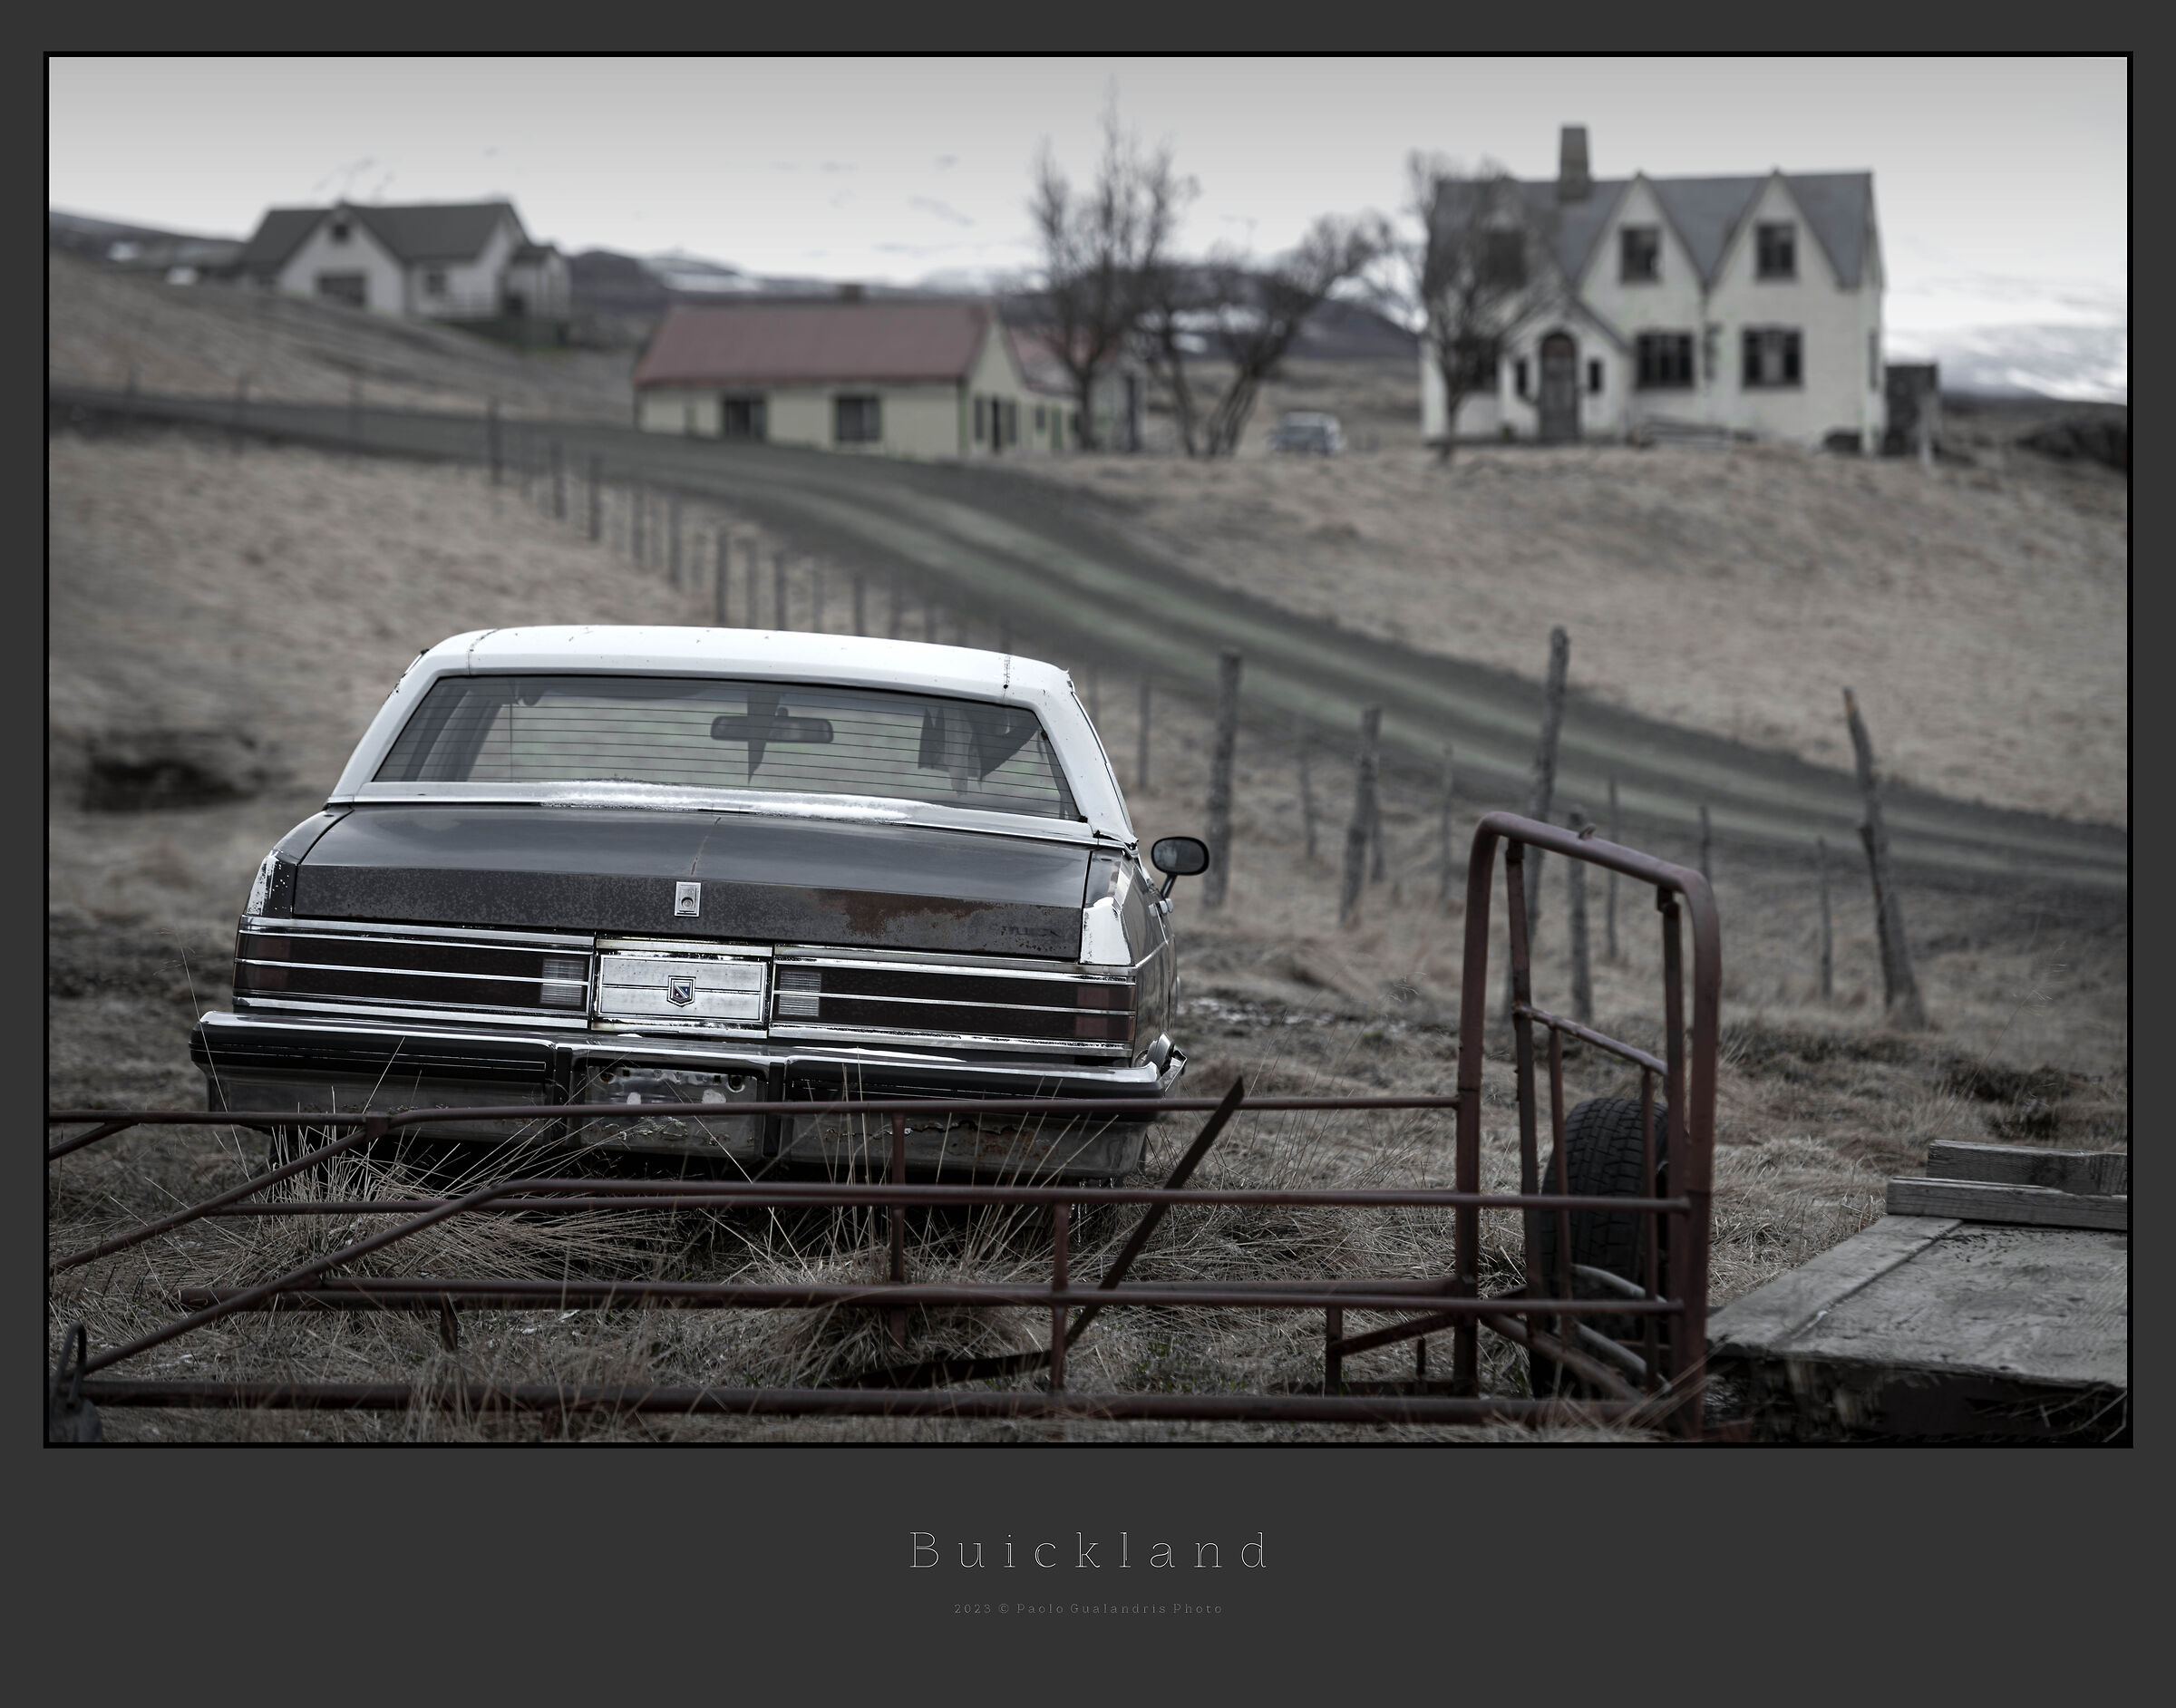 Buickland...